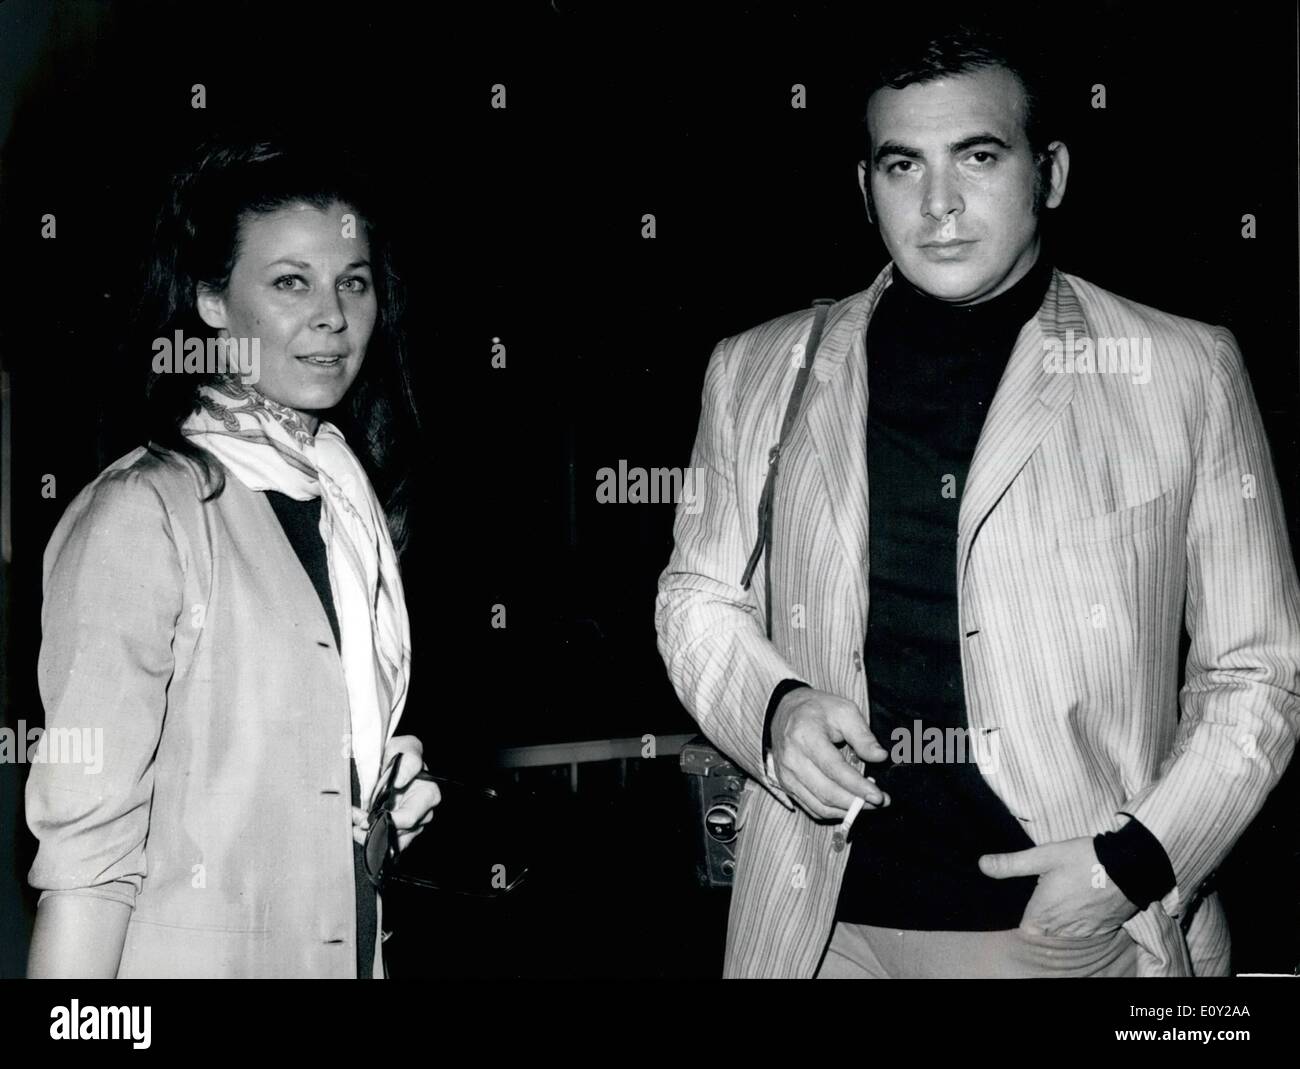 Jun. 06, 1968 - Italian actor Maurizio Arena , who was the protagonist of the love story with the Princess Beatrice of Savoy, departed for Buenos Ayres accompanied by his new fiancee Dafne Dayne who resembles in extraordinary was to the Princess Beatrice, Maurizio Arena and Dafne are working in a film that counts the story of the ''romantic love'' between the Princess and the actor. Photo shows Maurizio Arena and Daphne Dayne ad the depart for Buenos Ayres. Stock Photo